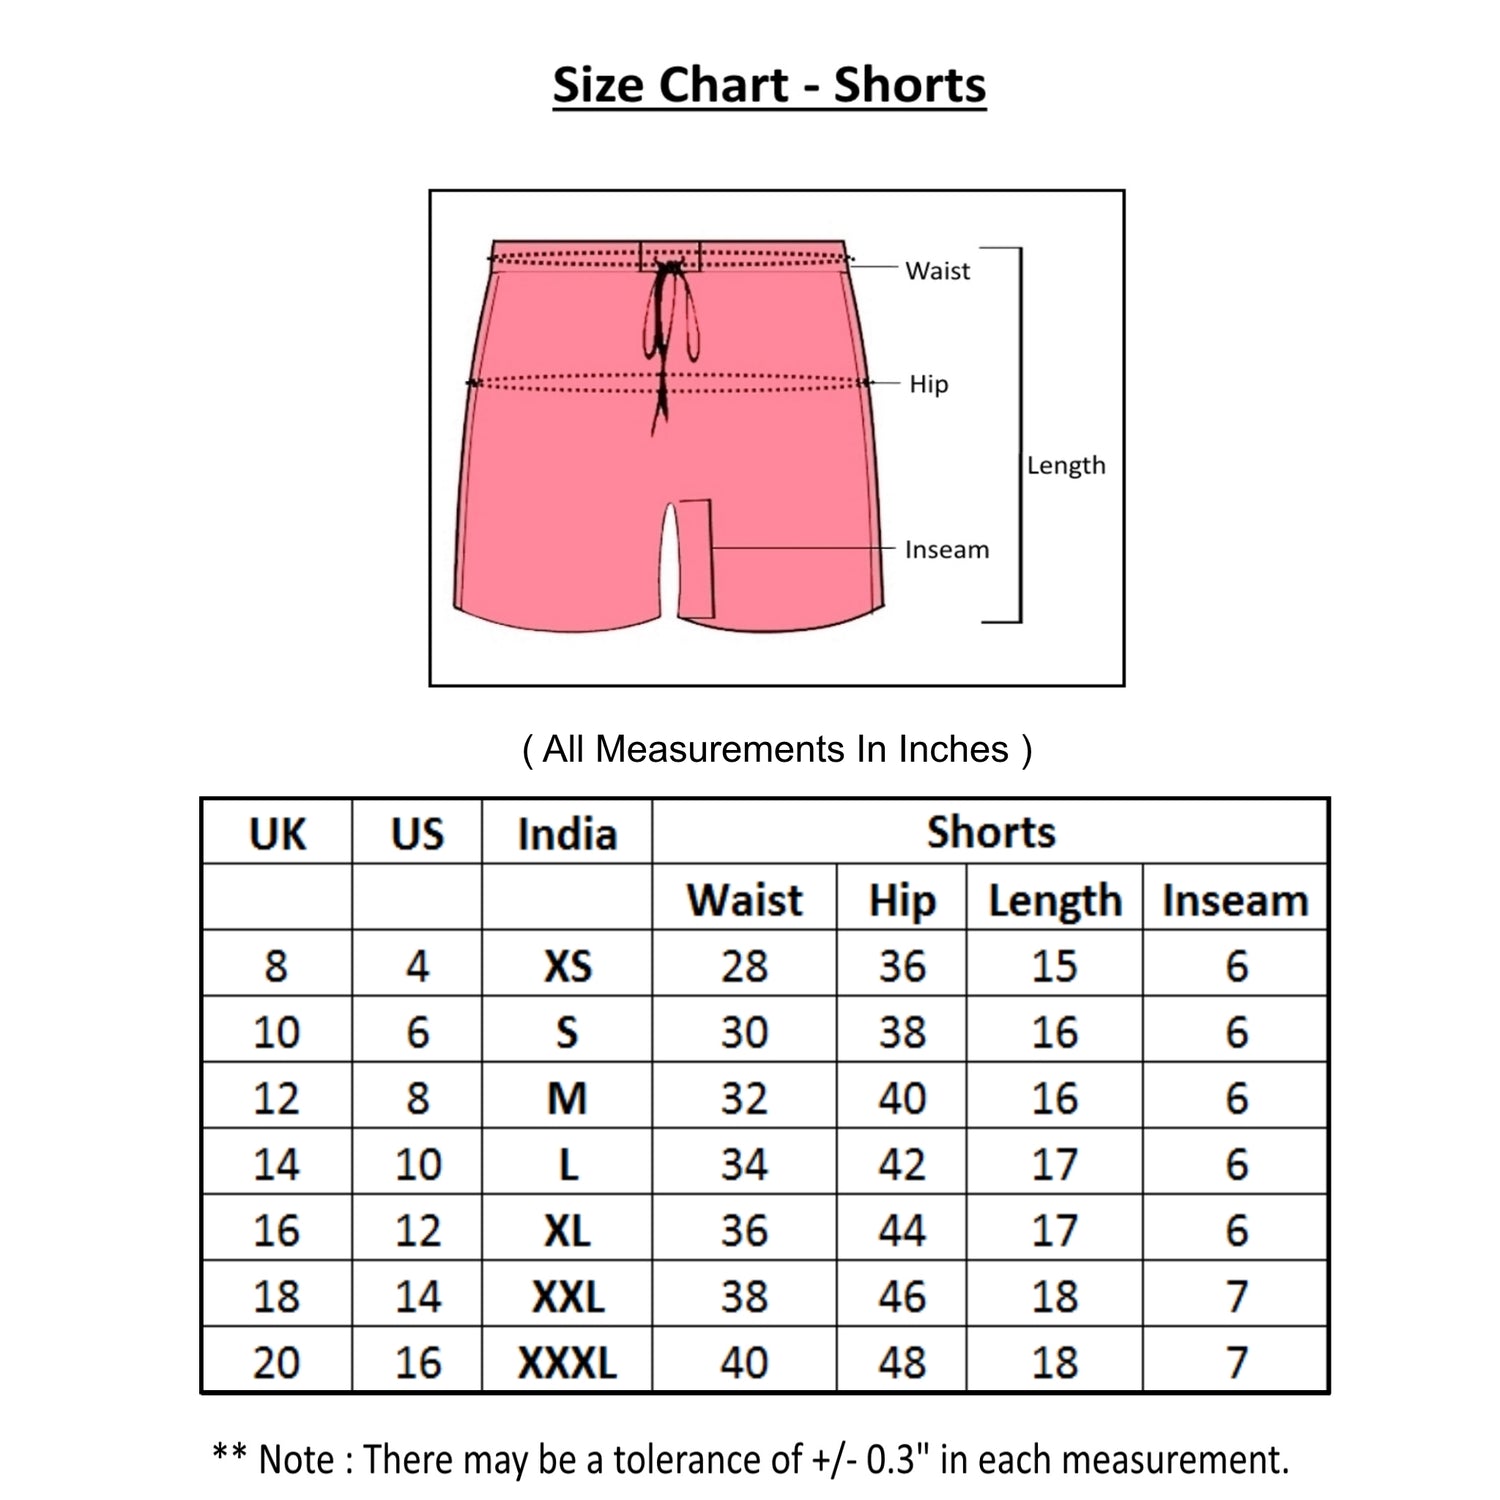 size chart for cotton night shorts with all measurement details for all sizes